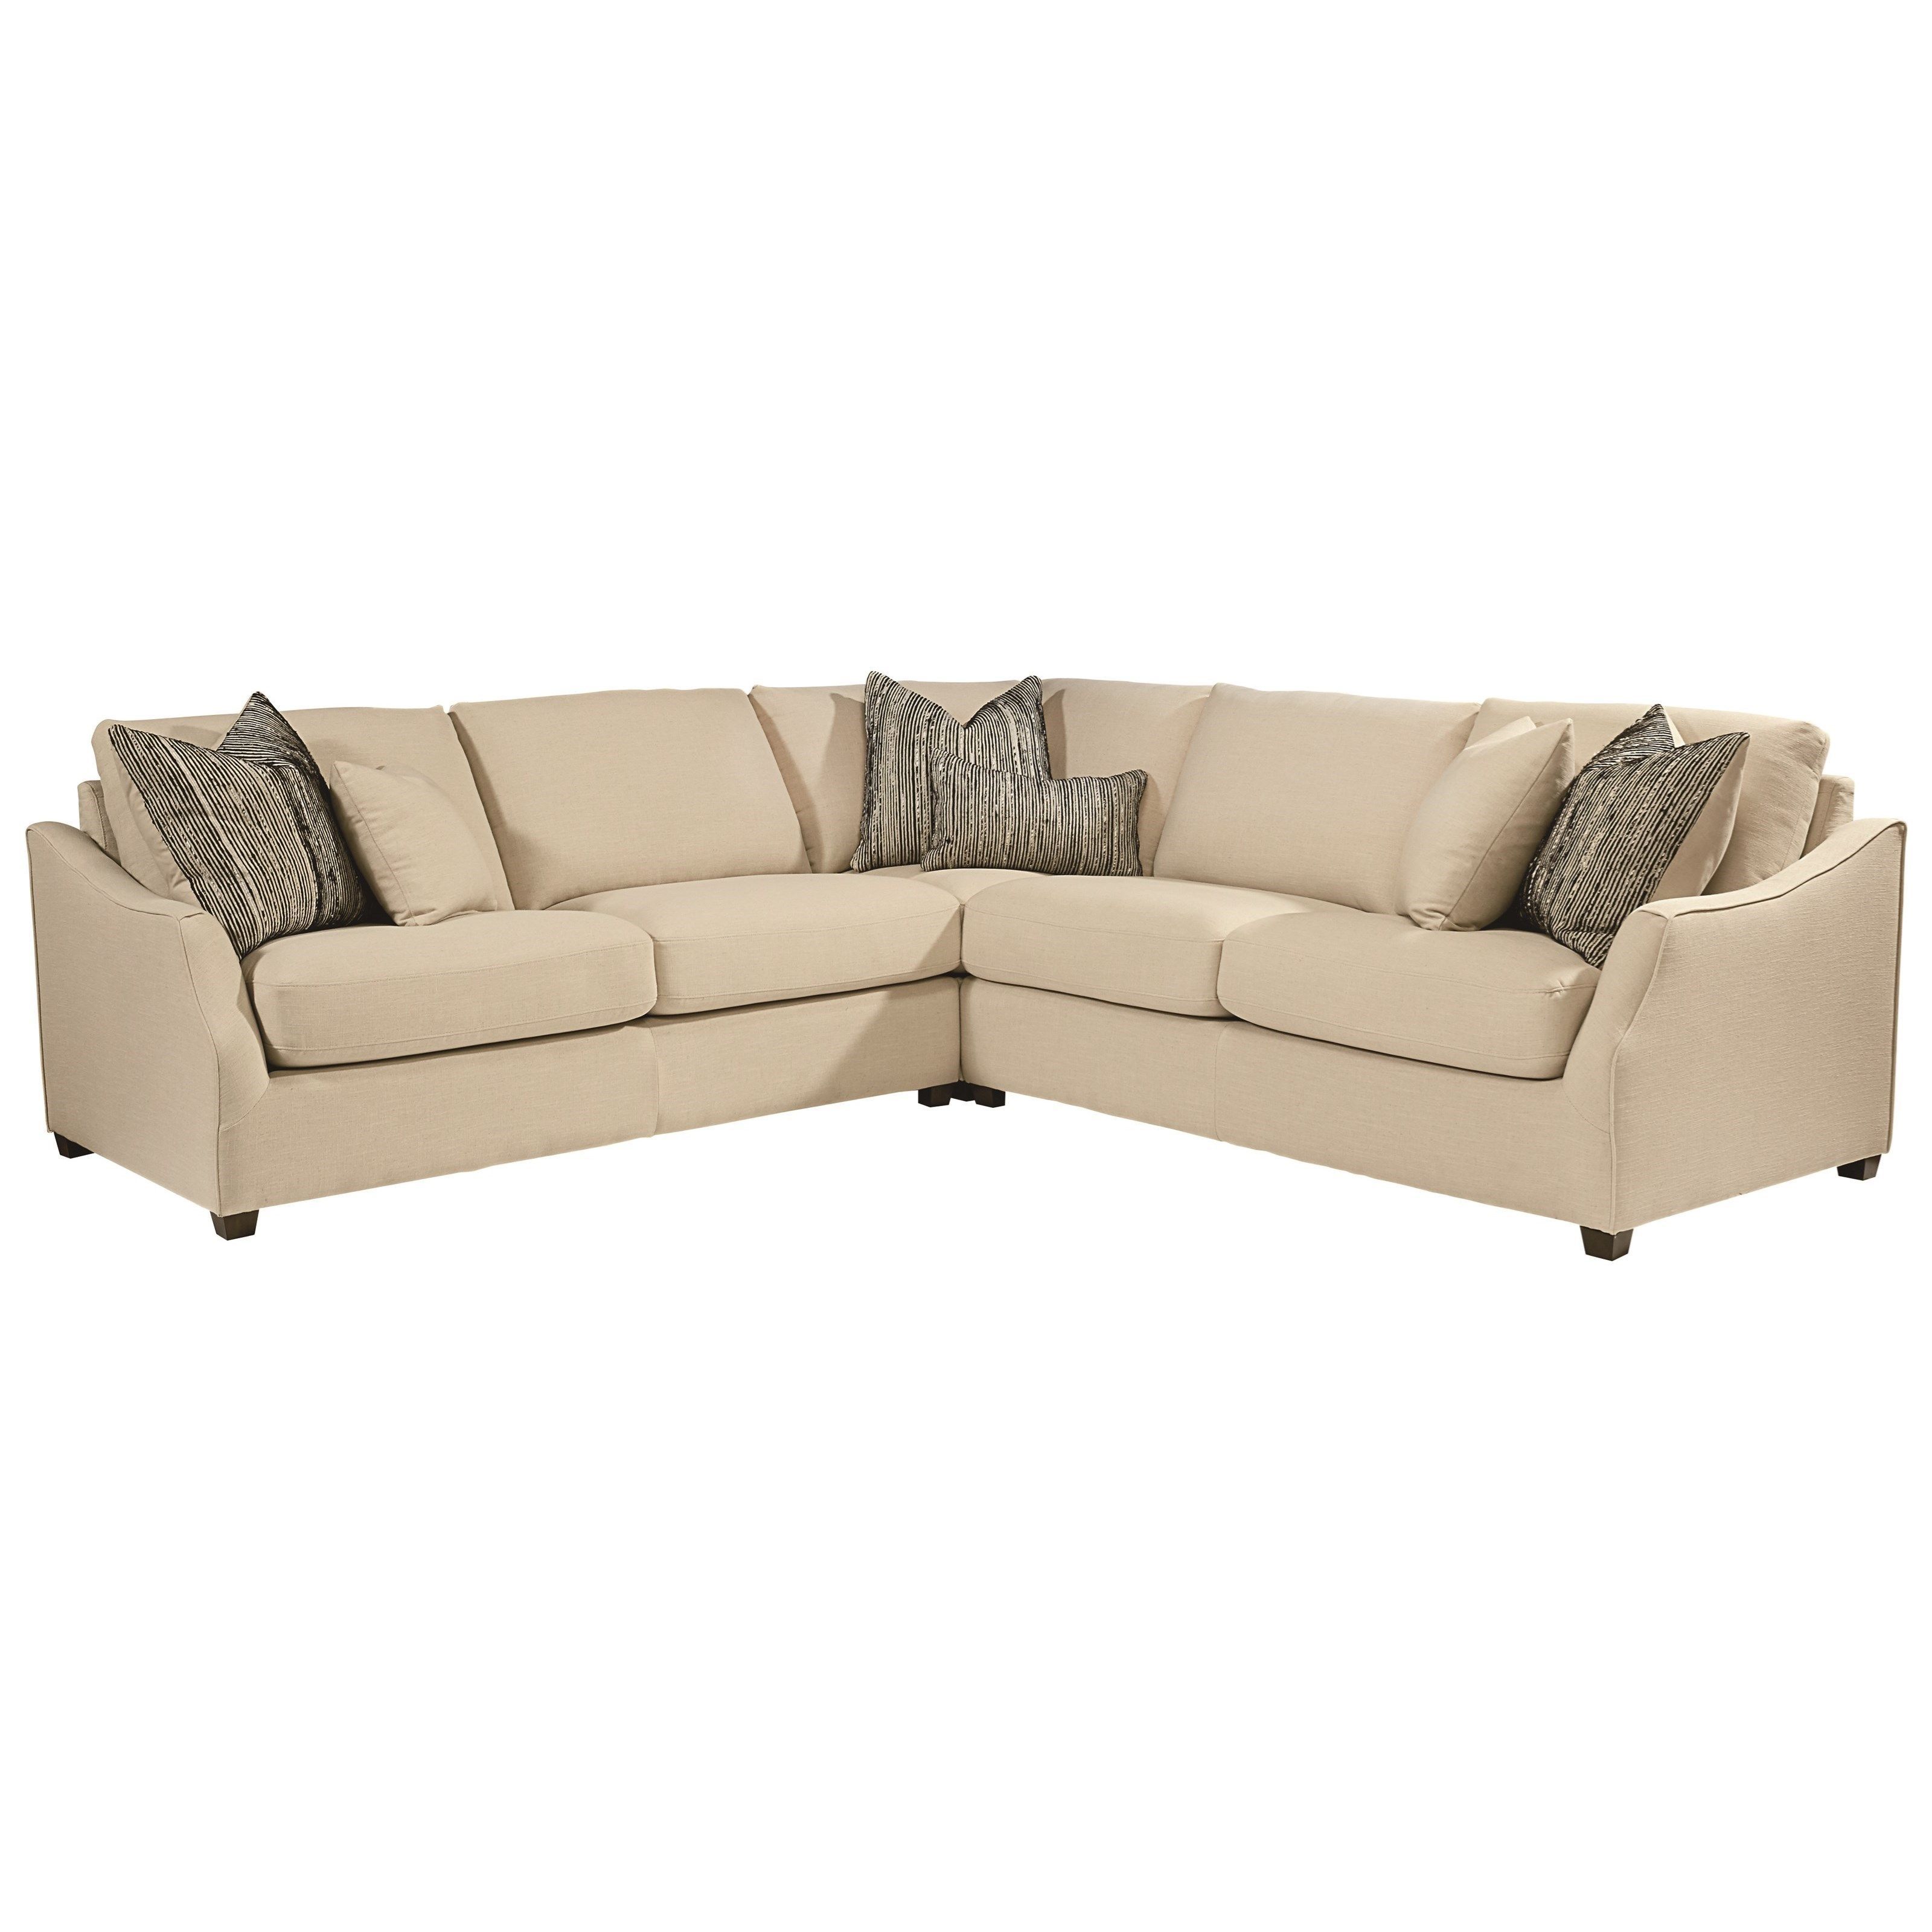 Magnolia Homejoanna Gaines Homestead Three Piece Sectional Pertaining To Magnolia Home Paradigm Sofa Chairs By Joanna Gaines (View 12 of 20)